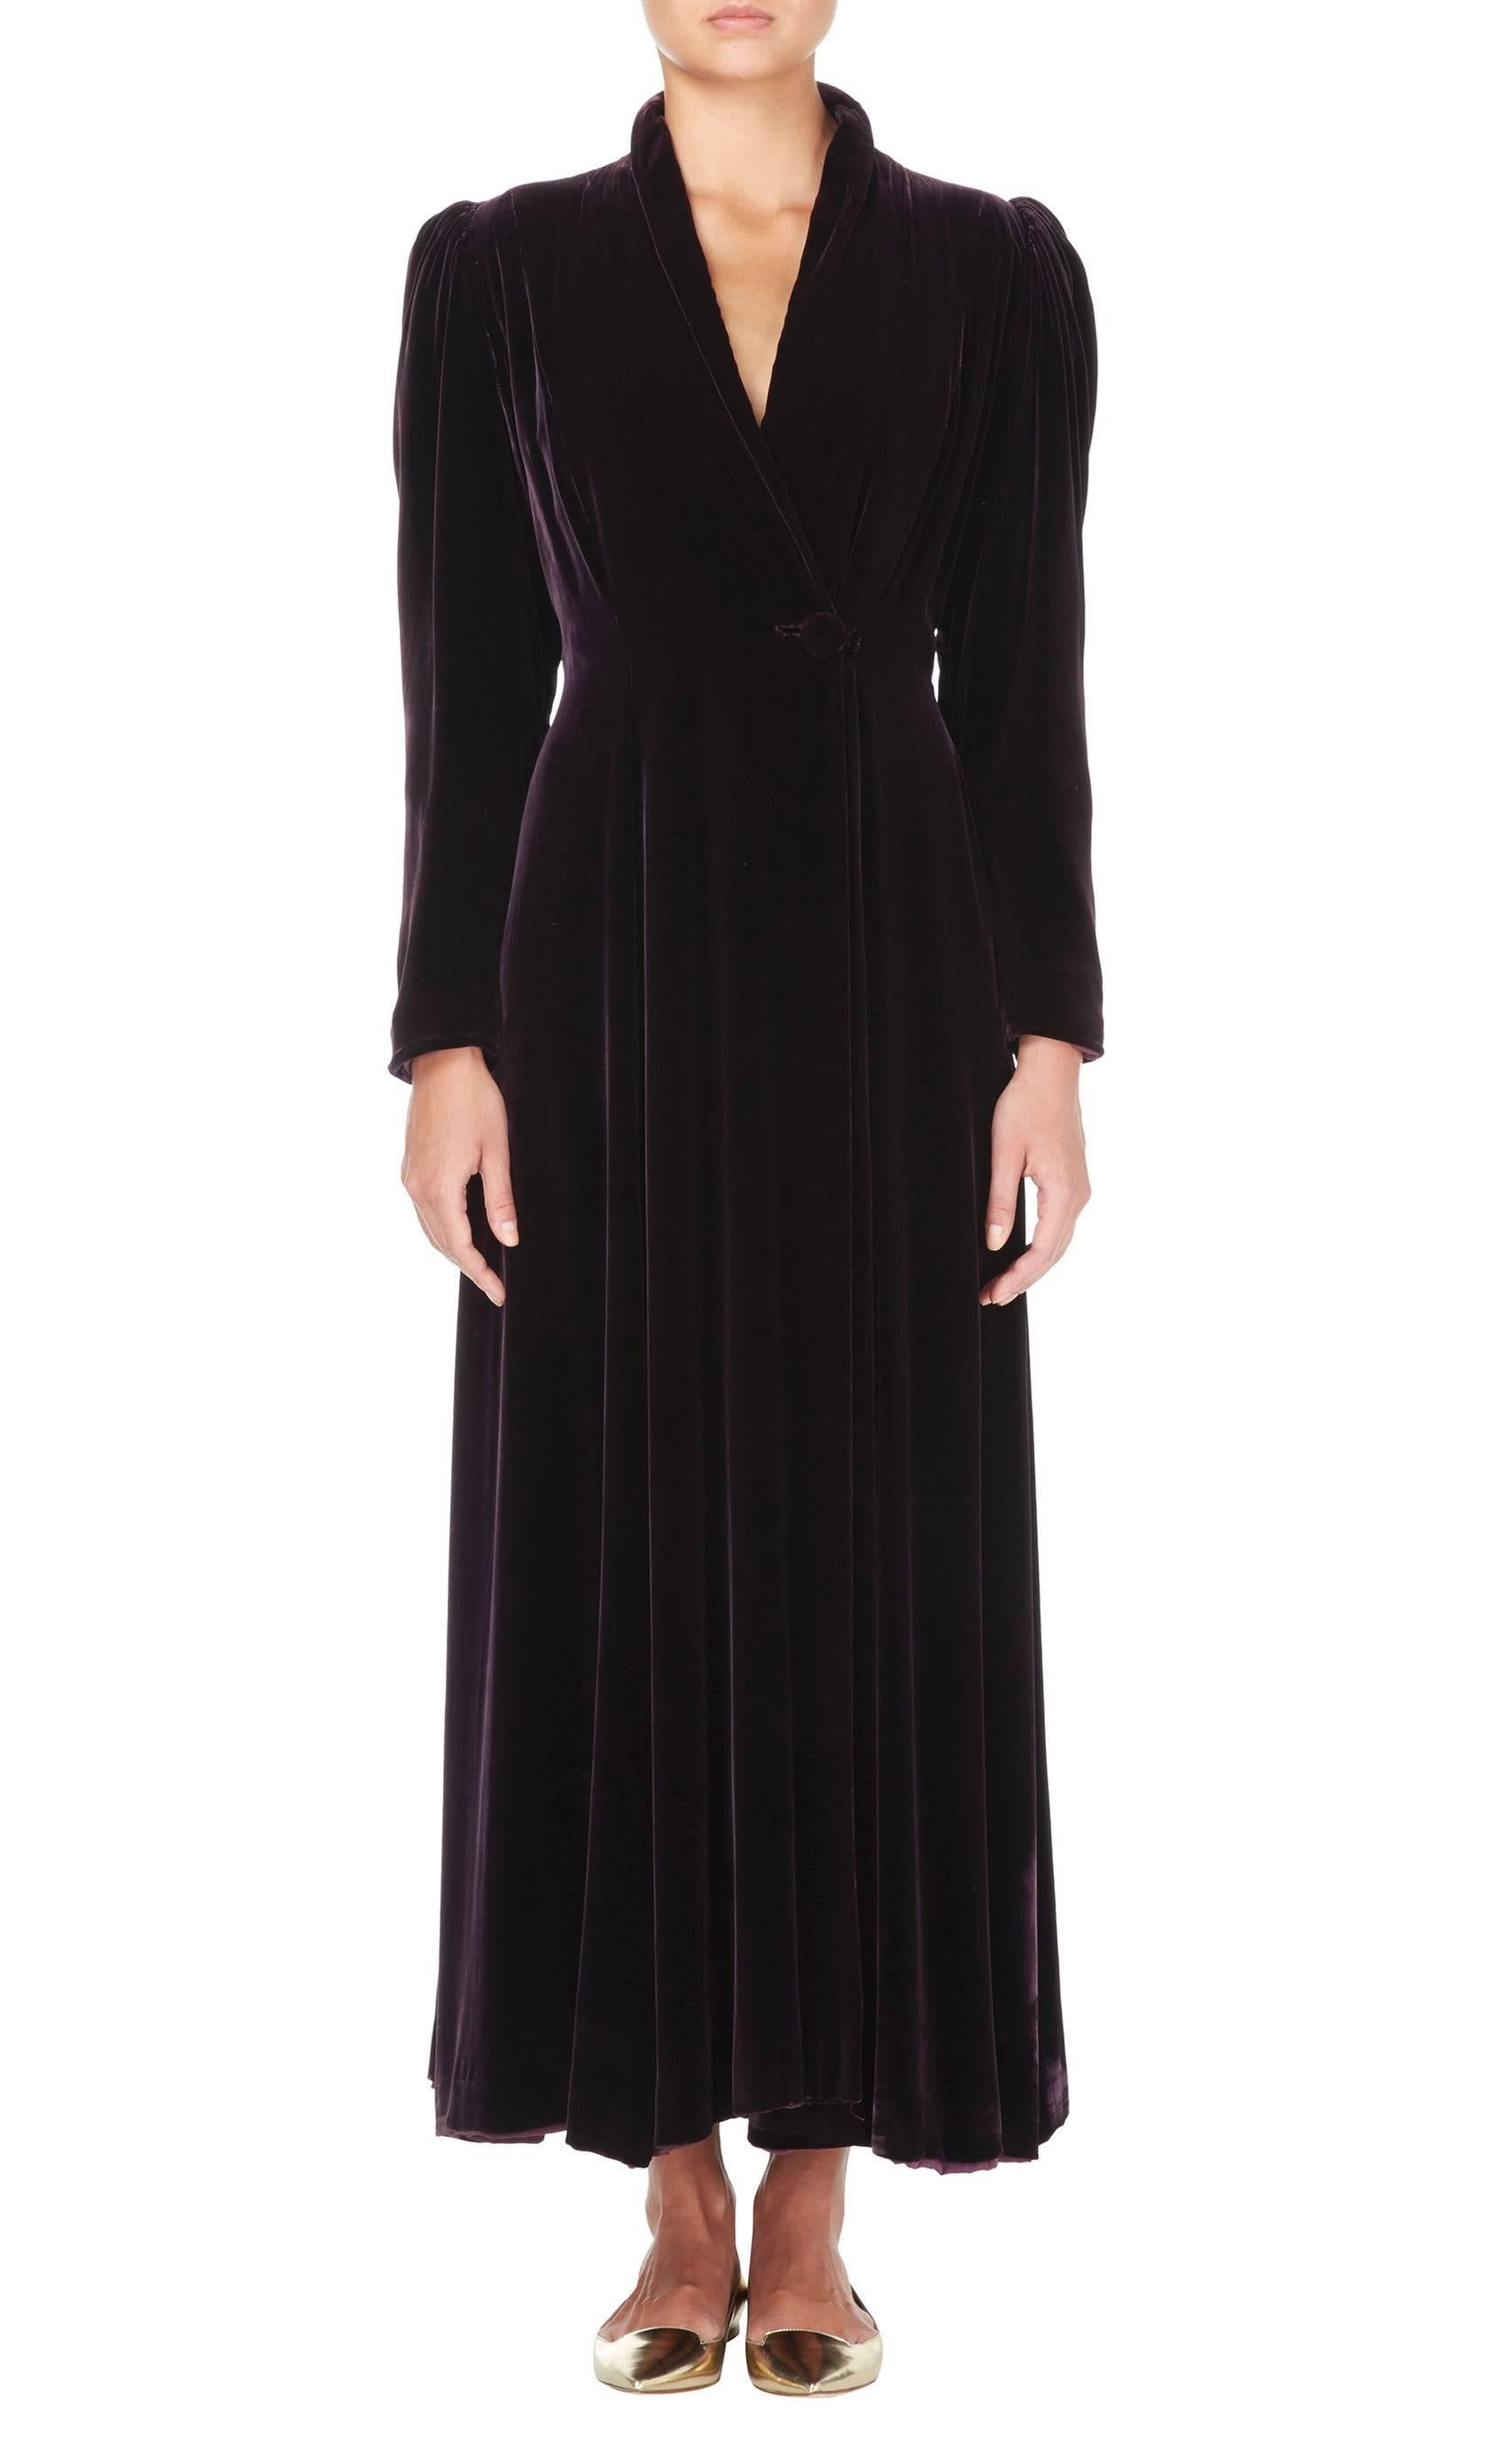 This opulent velvet evening coat by Valentina is a fabulous cover-up for an evening event. Constructed from plush velvet in a gorgeous shade of deep purple, the puffed shoulders give add a touch of drama to the otherwise linear silhouette. The